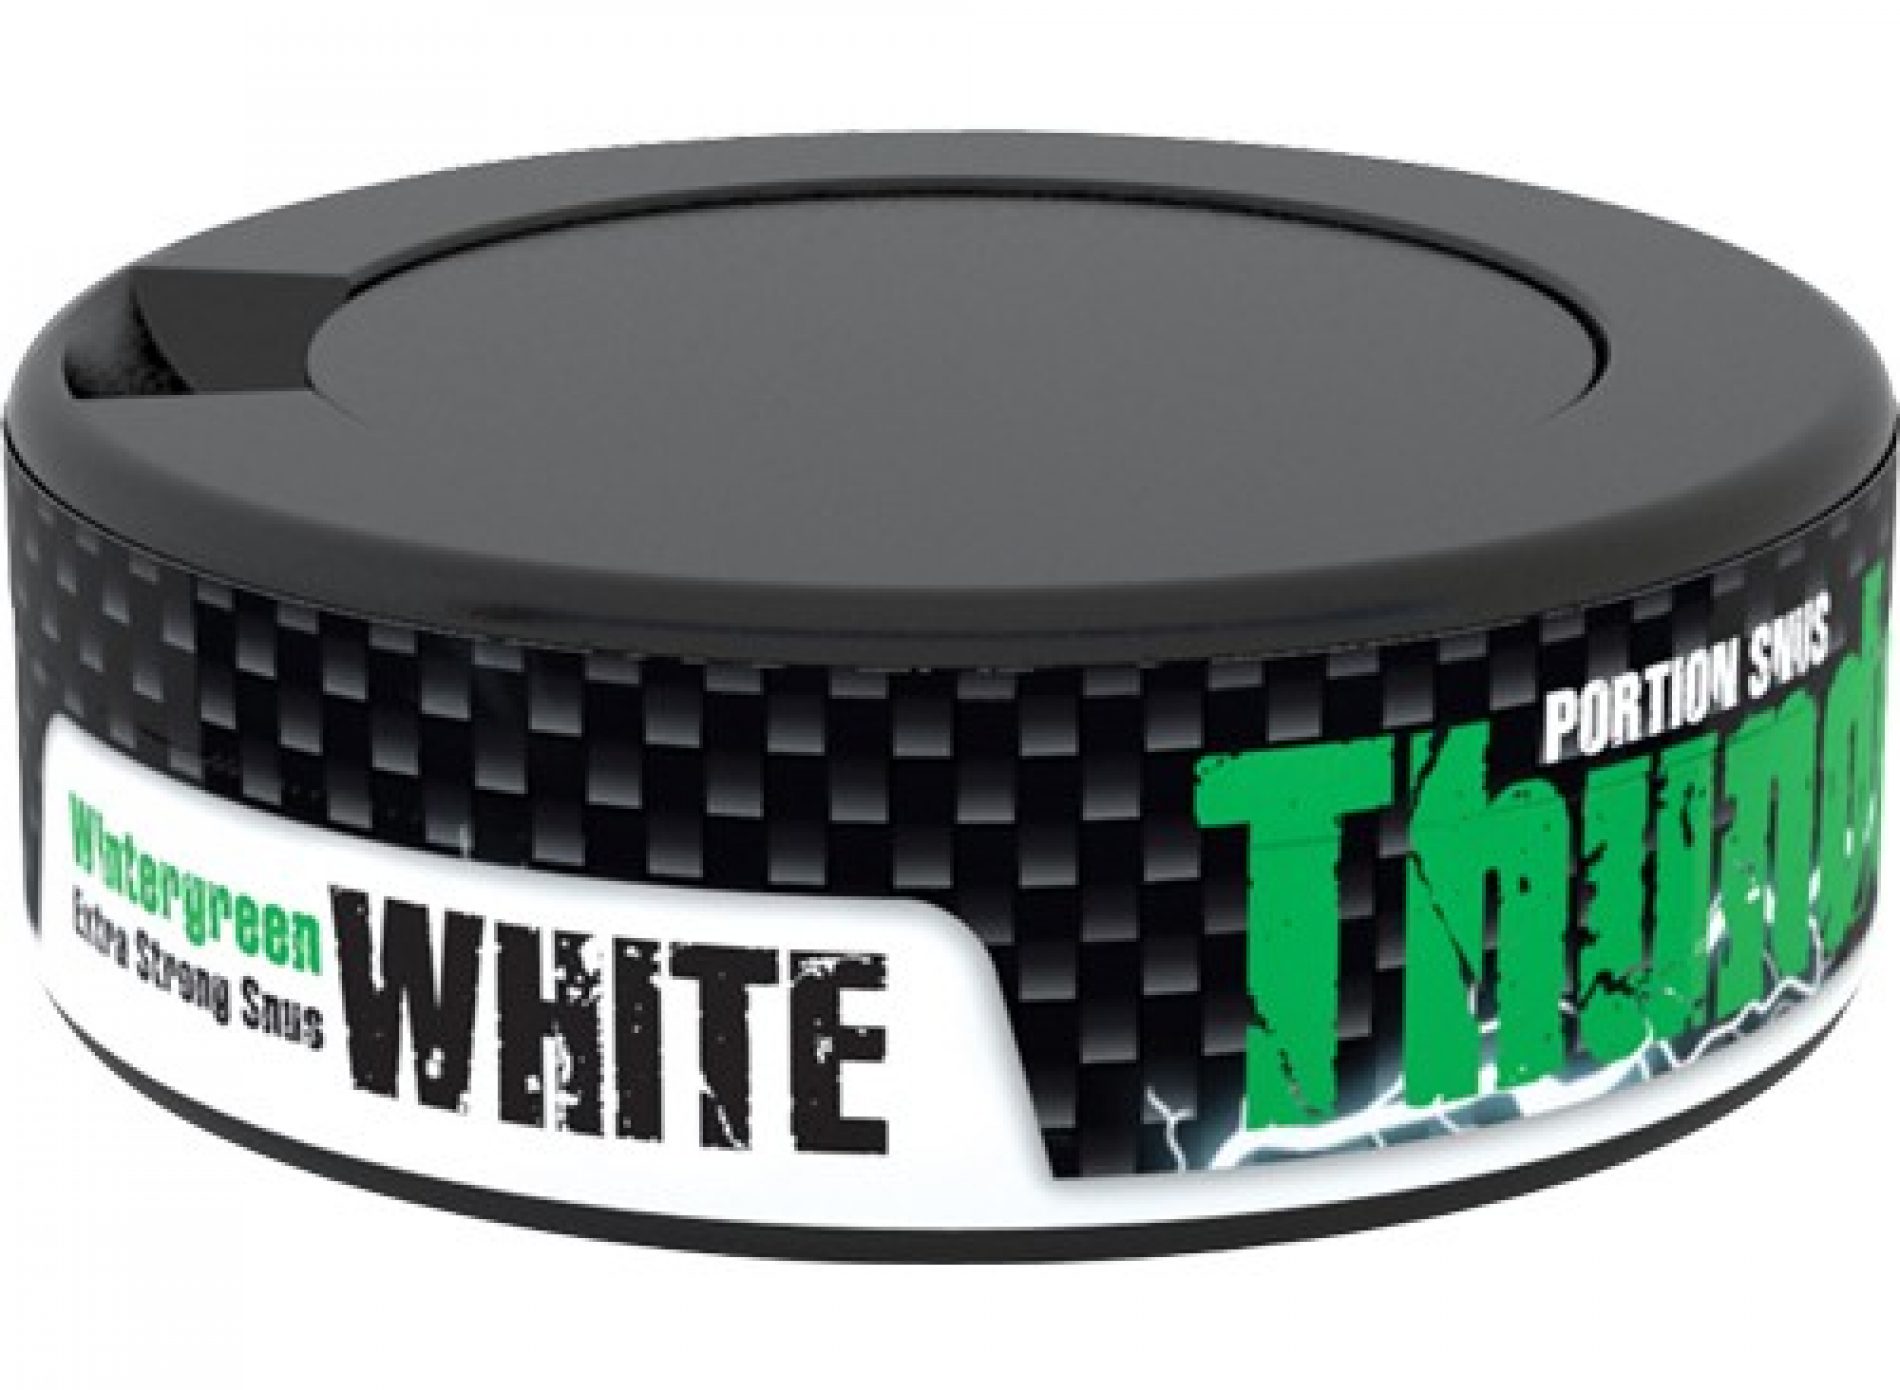 Thunder Wintergreen White Portion Snus – Reviewing the first of four new White Portions from V2 Tobacco